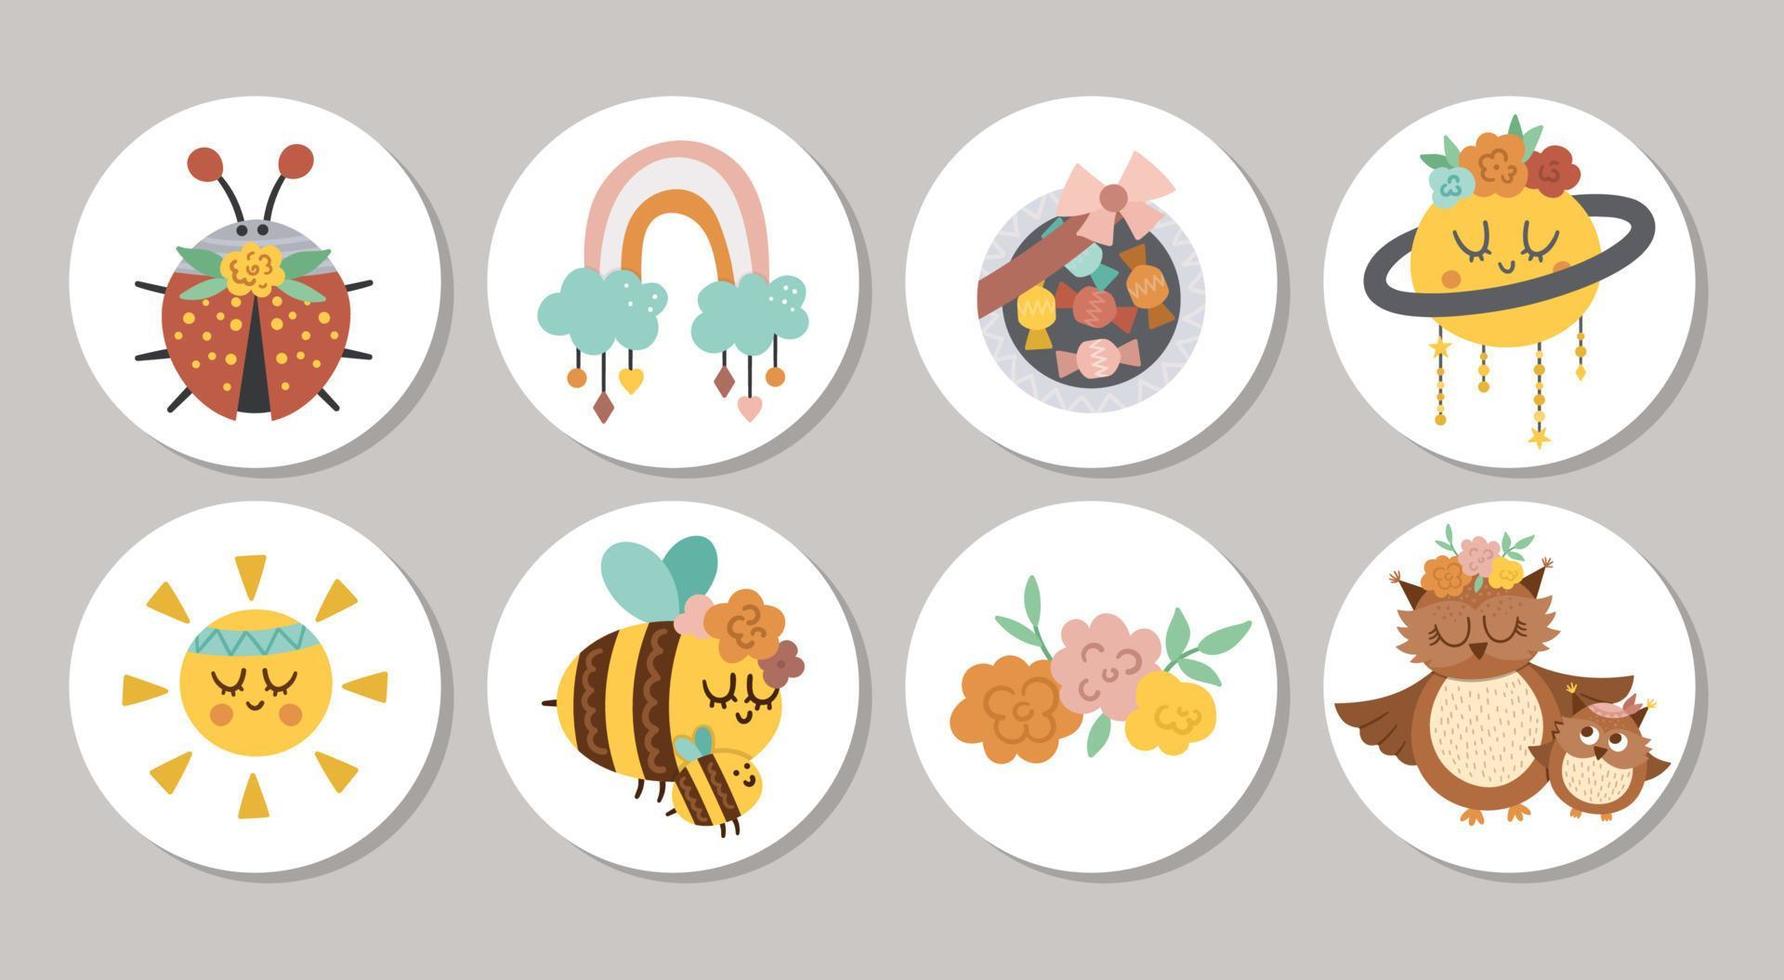 Cute set of round Mothers day highlight icons or card designs with cute animals, sweets, flowers. Vector spring holiday pin or badge design isolated on white background with family love concept